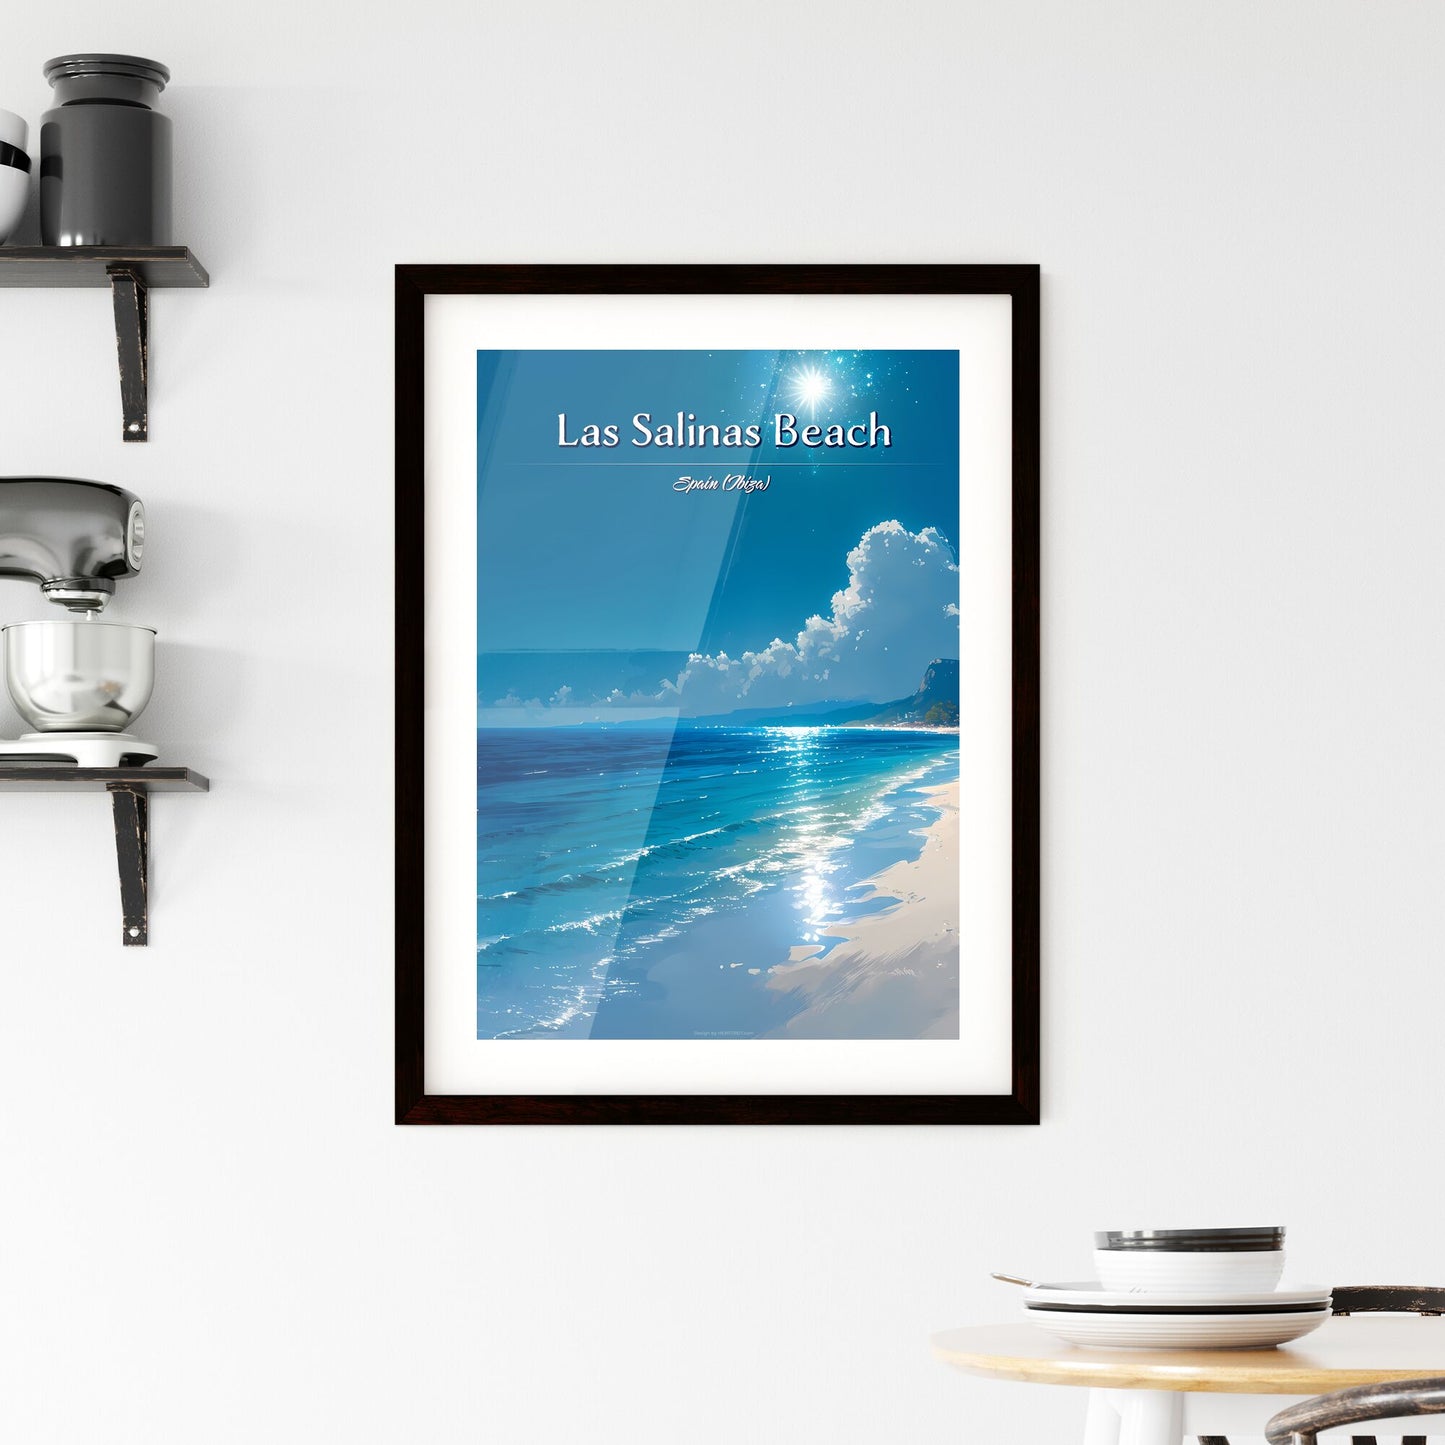 Las Salinas Beach, Spain (Ibiza) - Art print of a beach with blue water and clouds Default Title